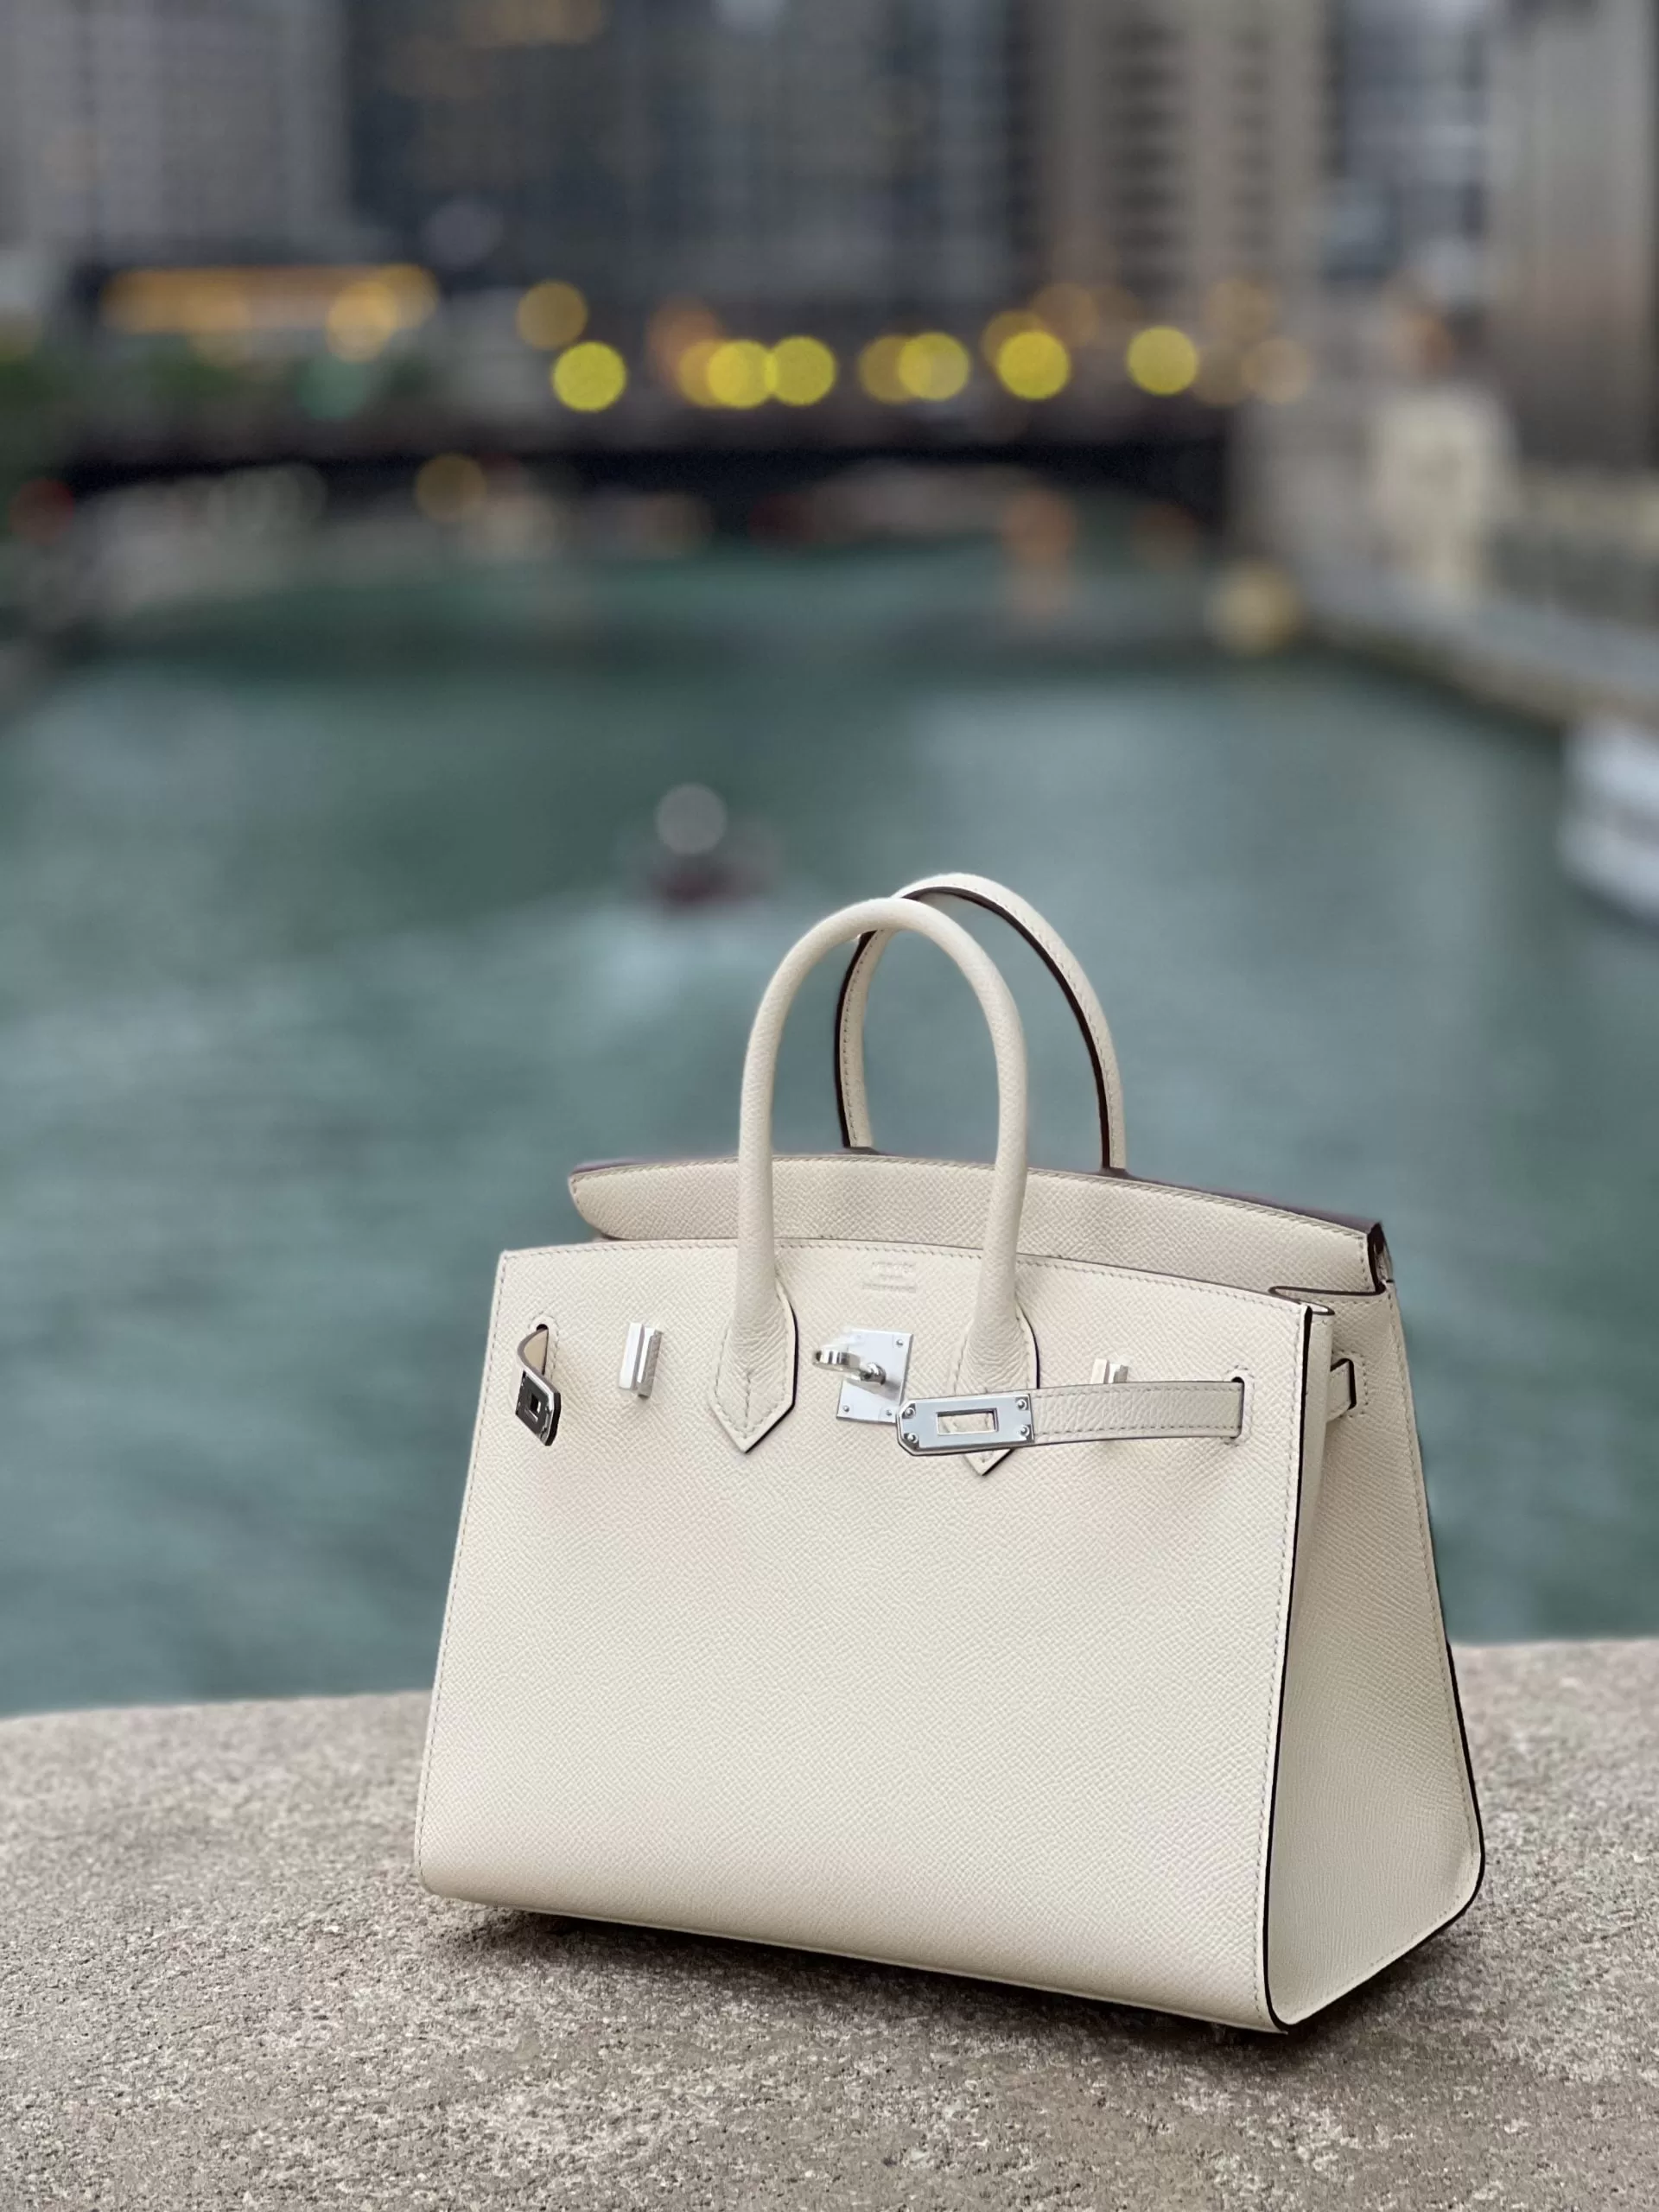 Are Hermes bags worth the money? - Quora